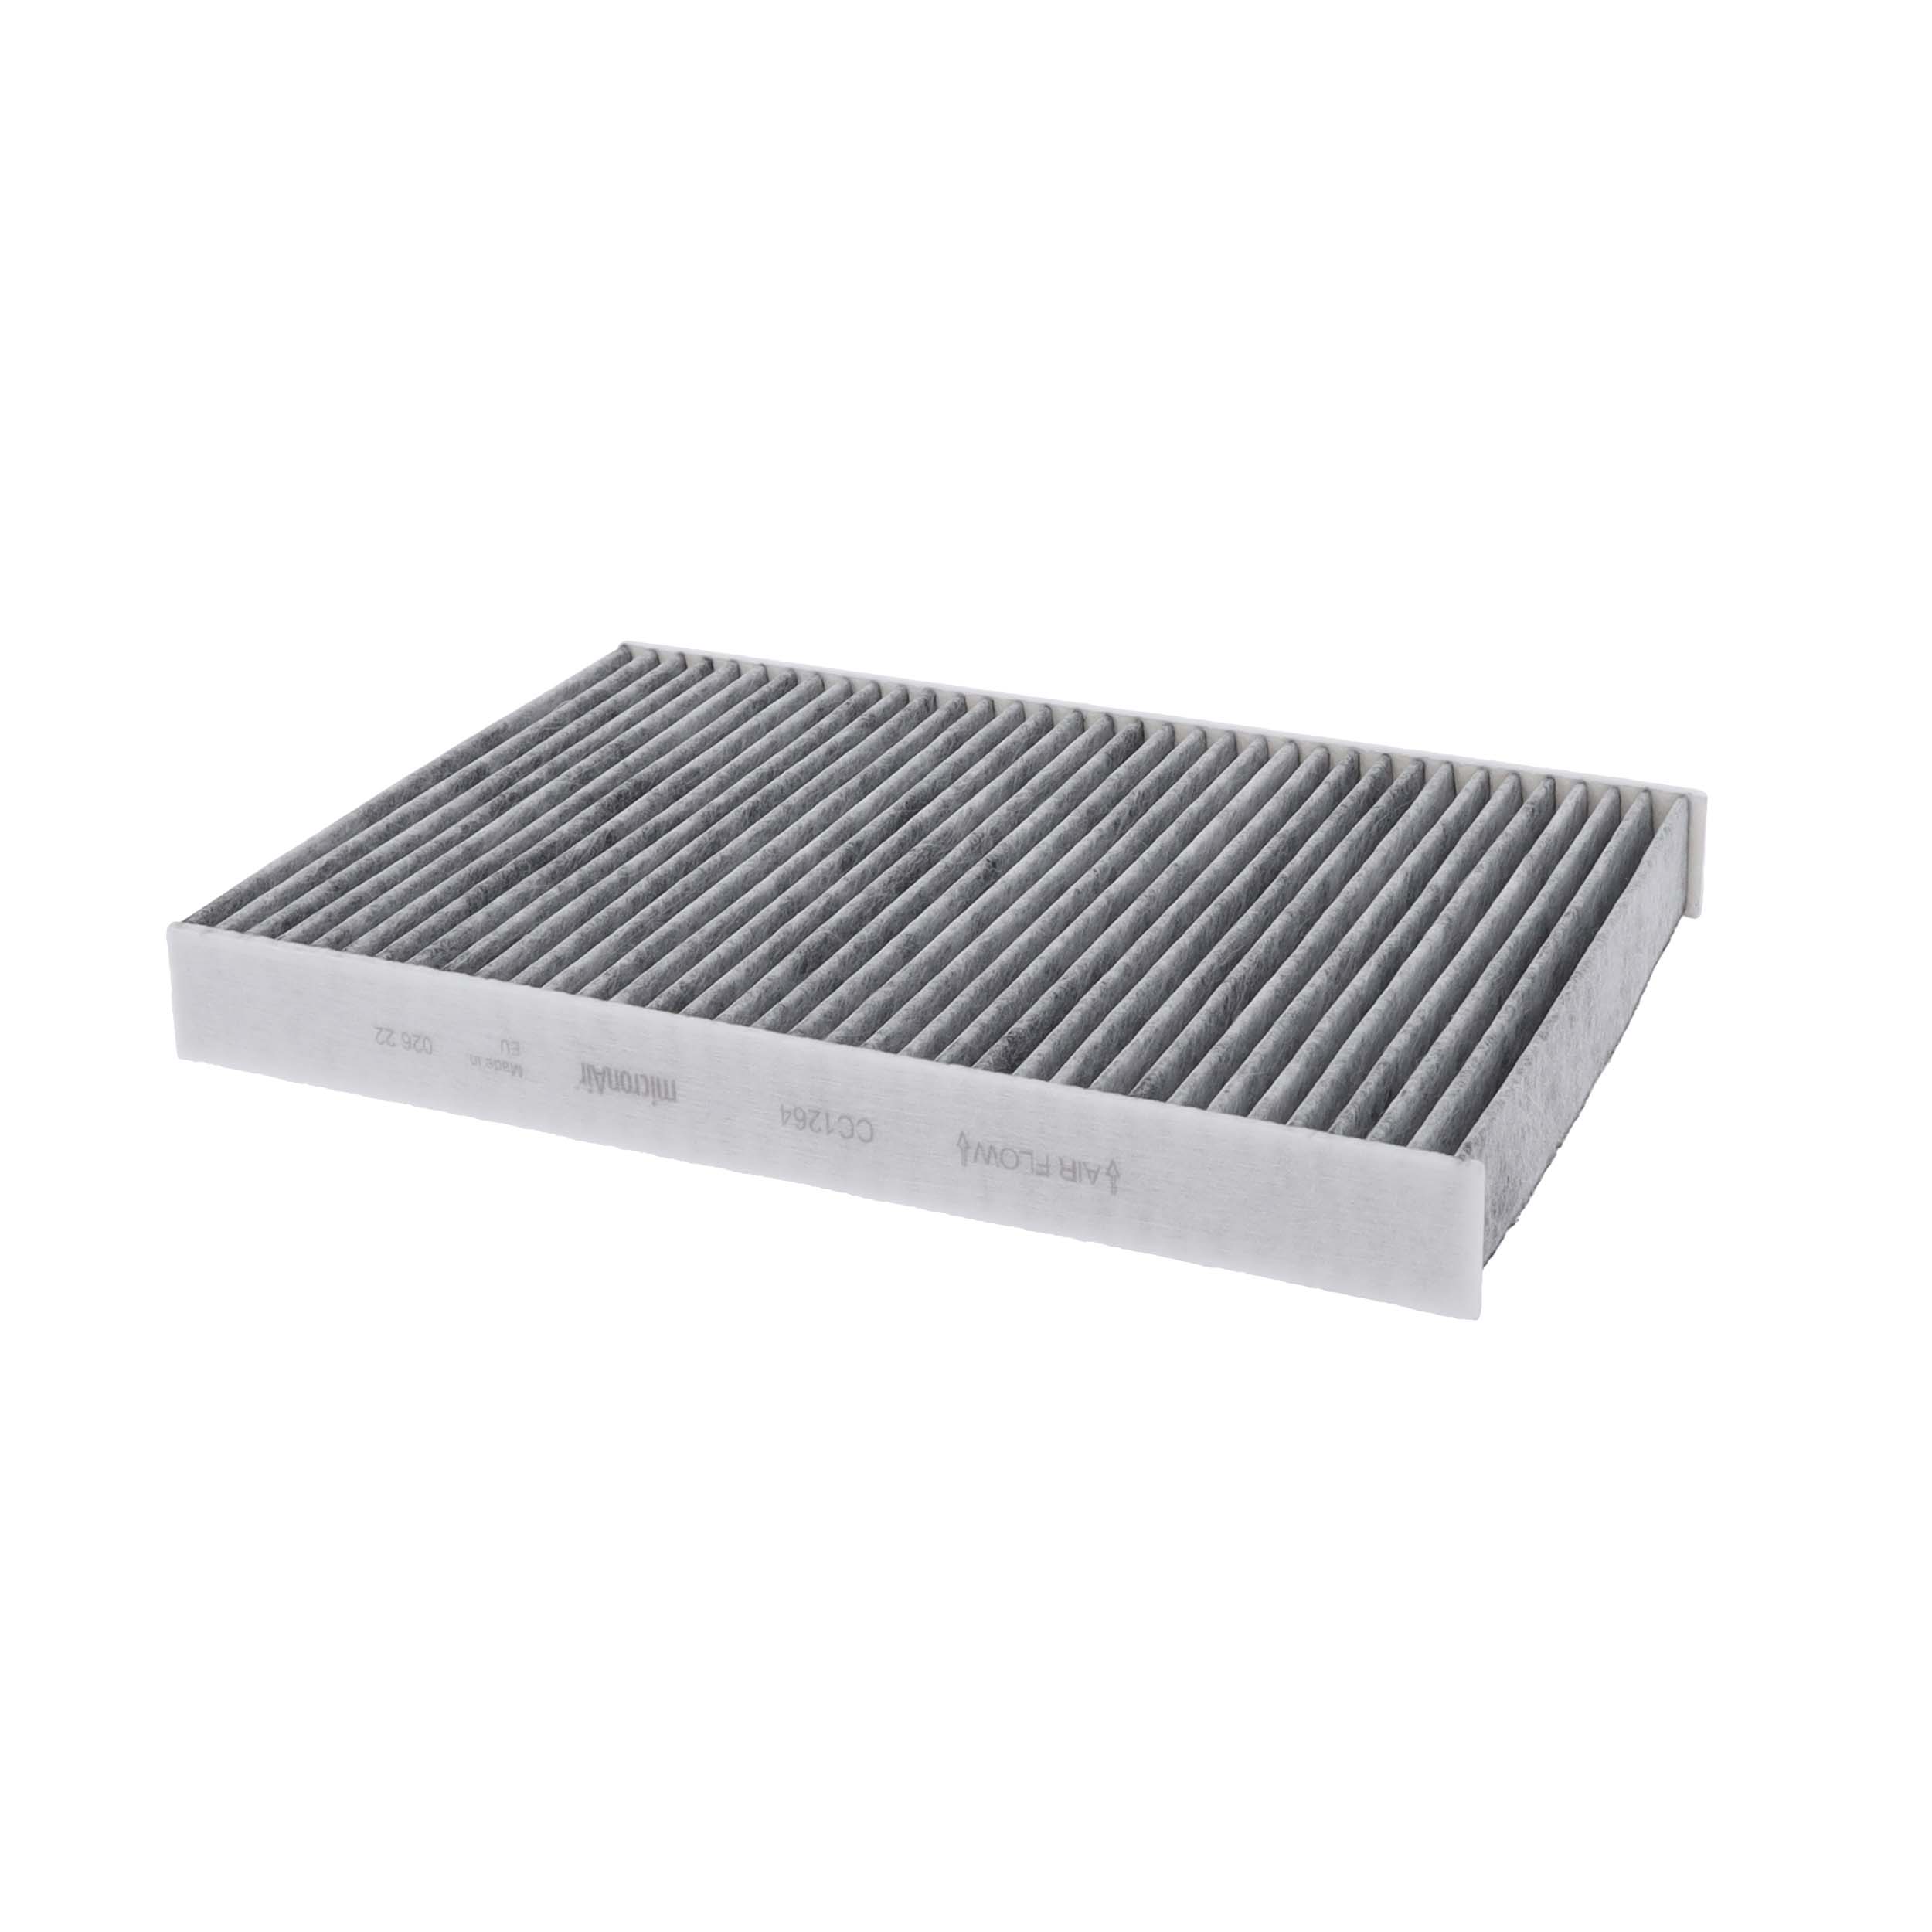 CORTECO Activated Carbon Filter, 270 mm x 193 mm x 30 mm Width: 193mm, Height: 30mm, Length: 270mm Cabin filter 80000713 buy